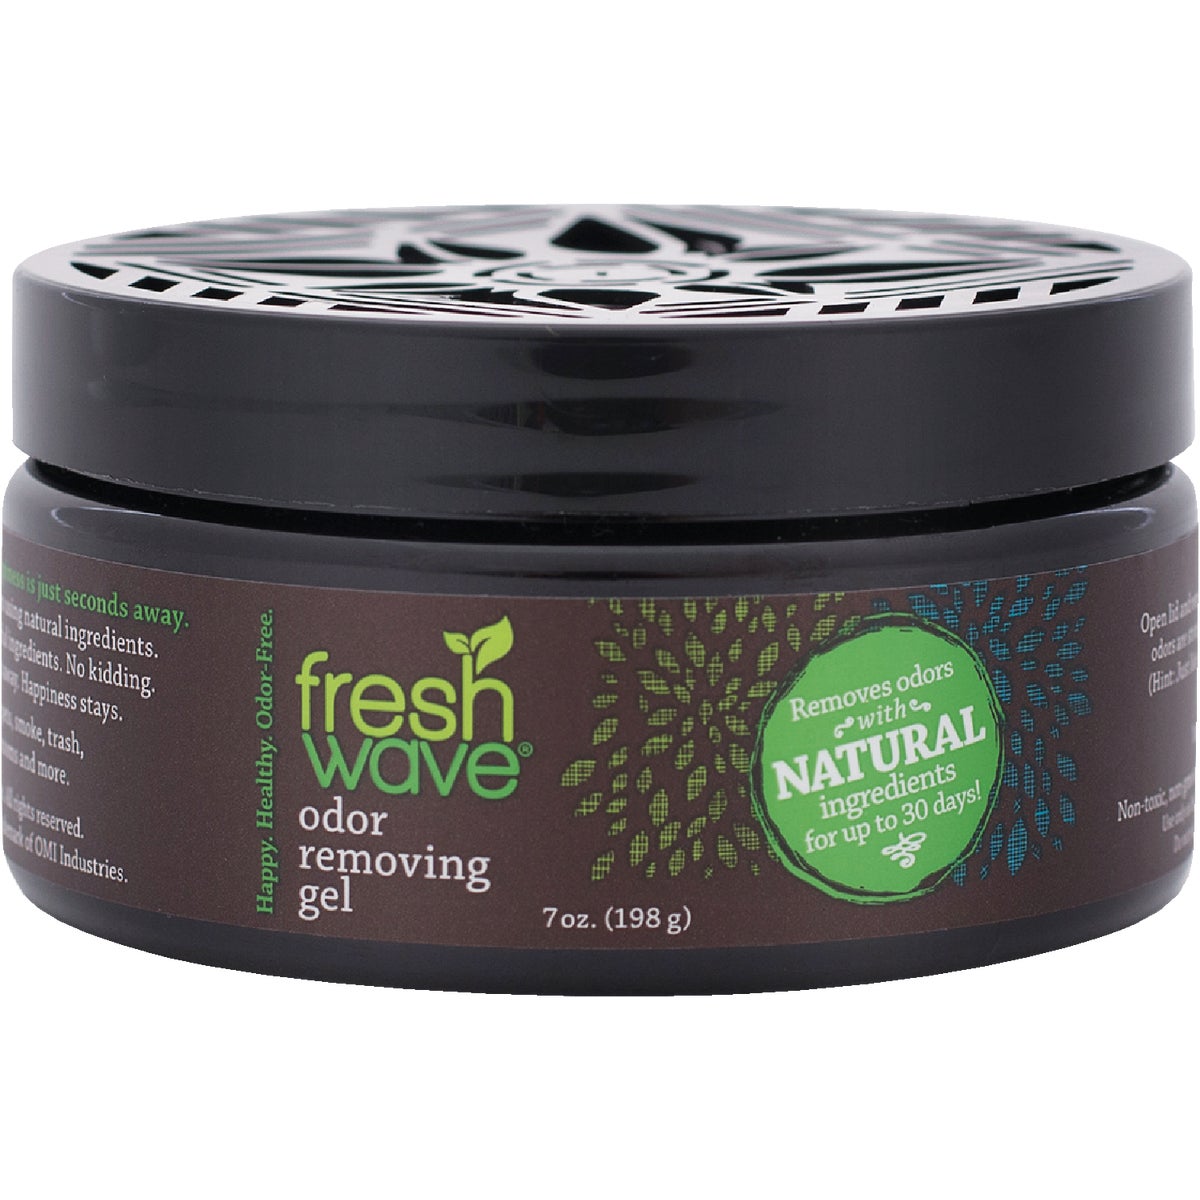 Item 601013, Life doesn't have to stink! Fresh Wave Gel removes odors using only natural